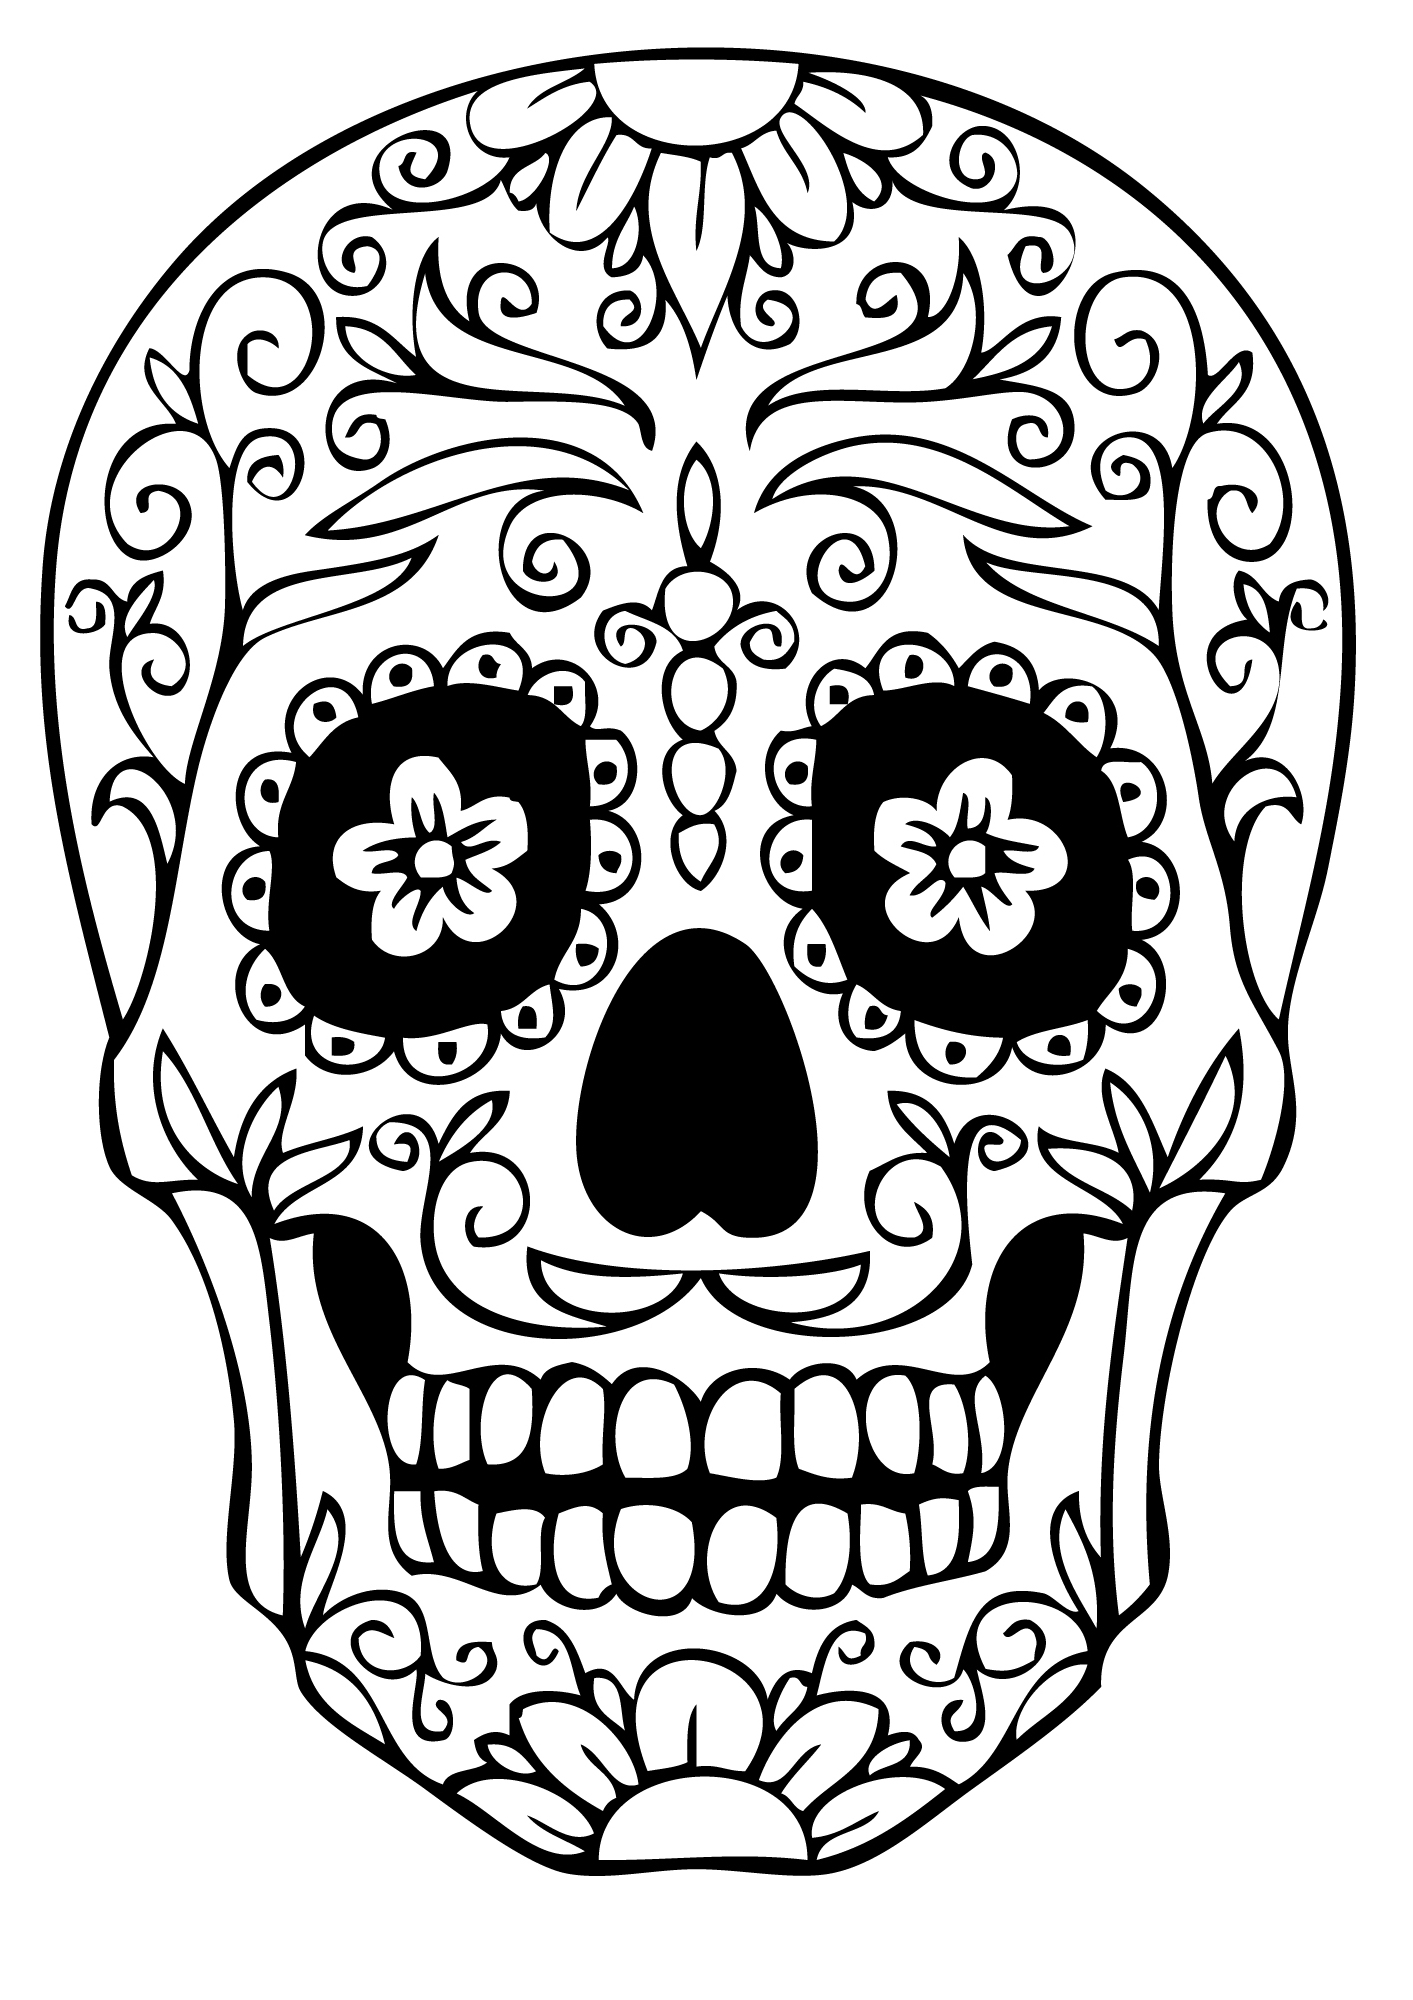 Drawing of Días de los muertos (Day of the Dead) free to download and